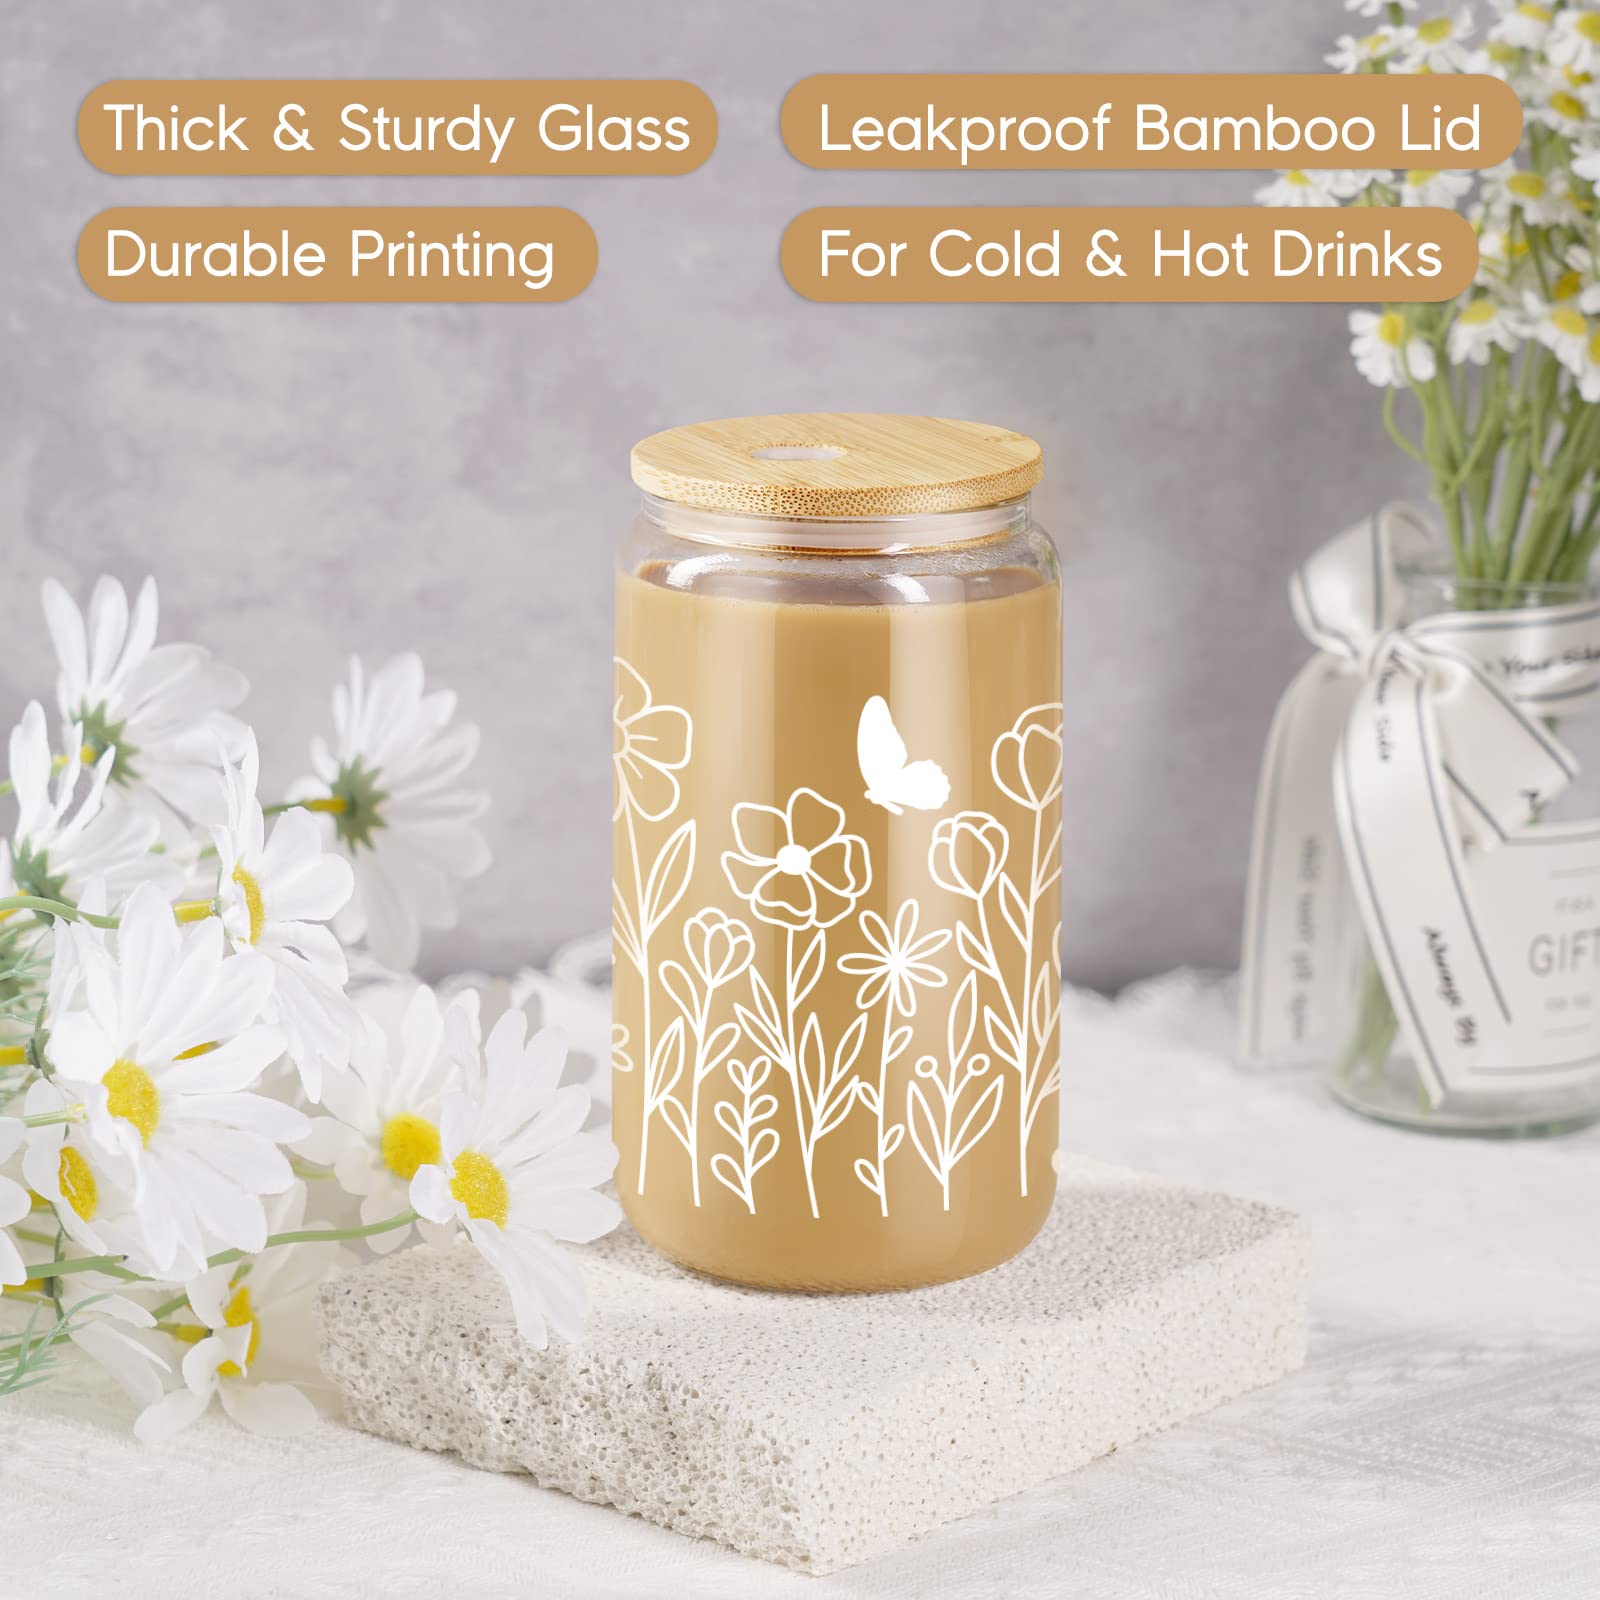 GSPY Floral with Butterfly Iced Coffee Cup, 16oz Iced Coffee Glasses with Lids and Straws - Cute Glass Cups, Aesthetic Cup, Glass Tumbler - Birthday, Mothers Day Gifts for Women, Coffee Lovers